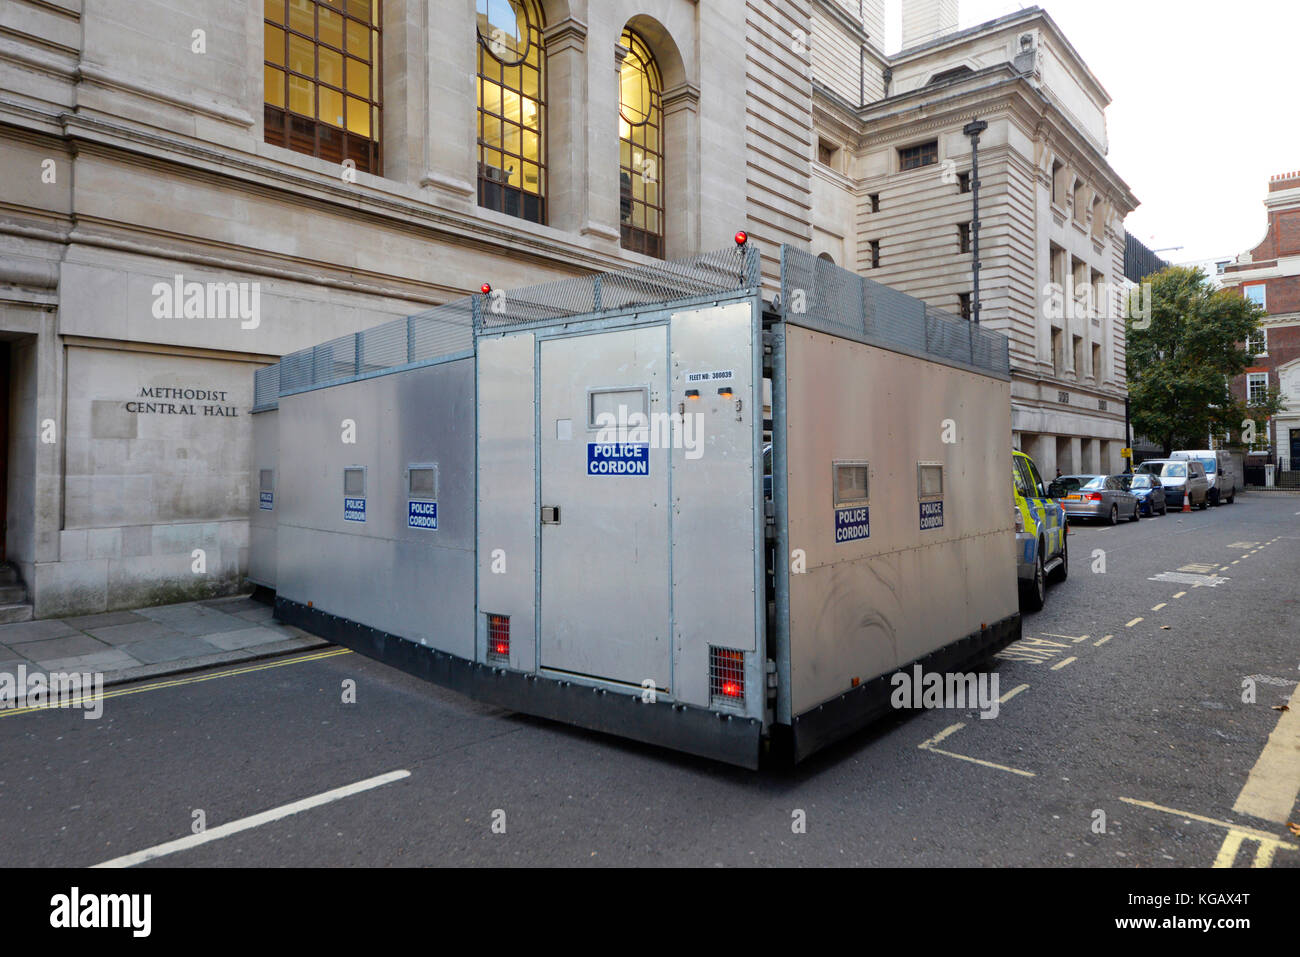 Police cordon trailer. Mobile cordon that can be towed into position. Protecting Methodist Central Hall, Westminster, London during protest march Stock Photo